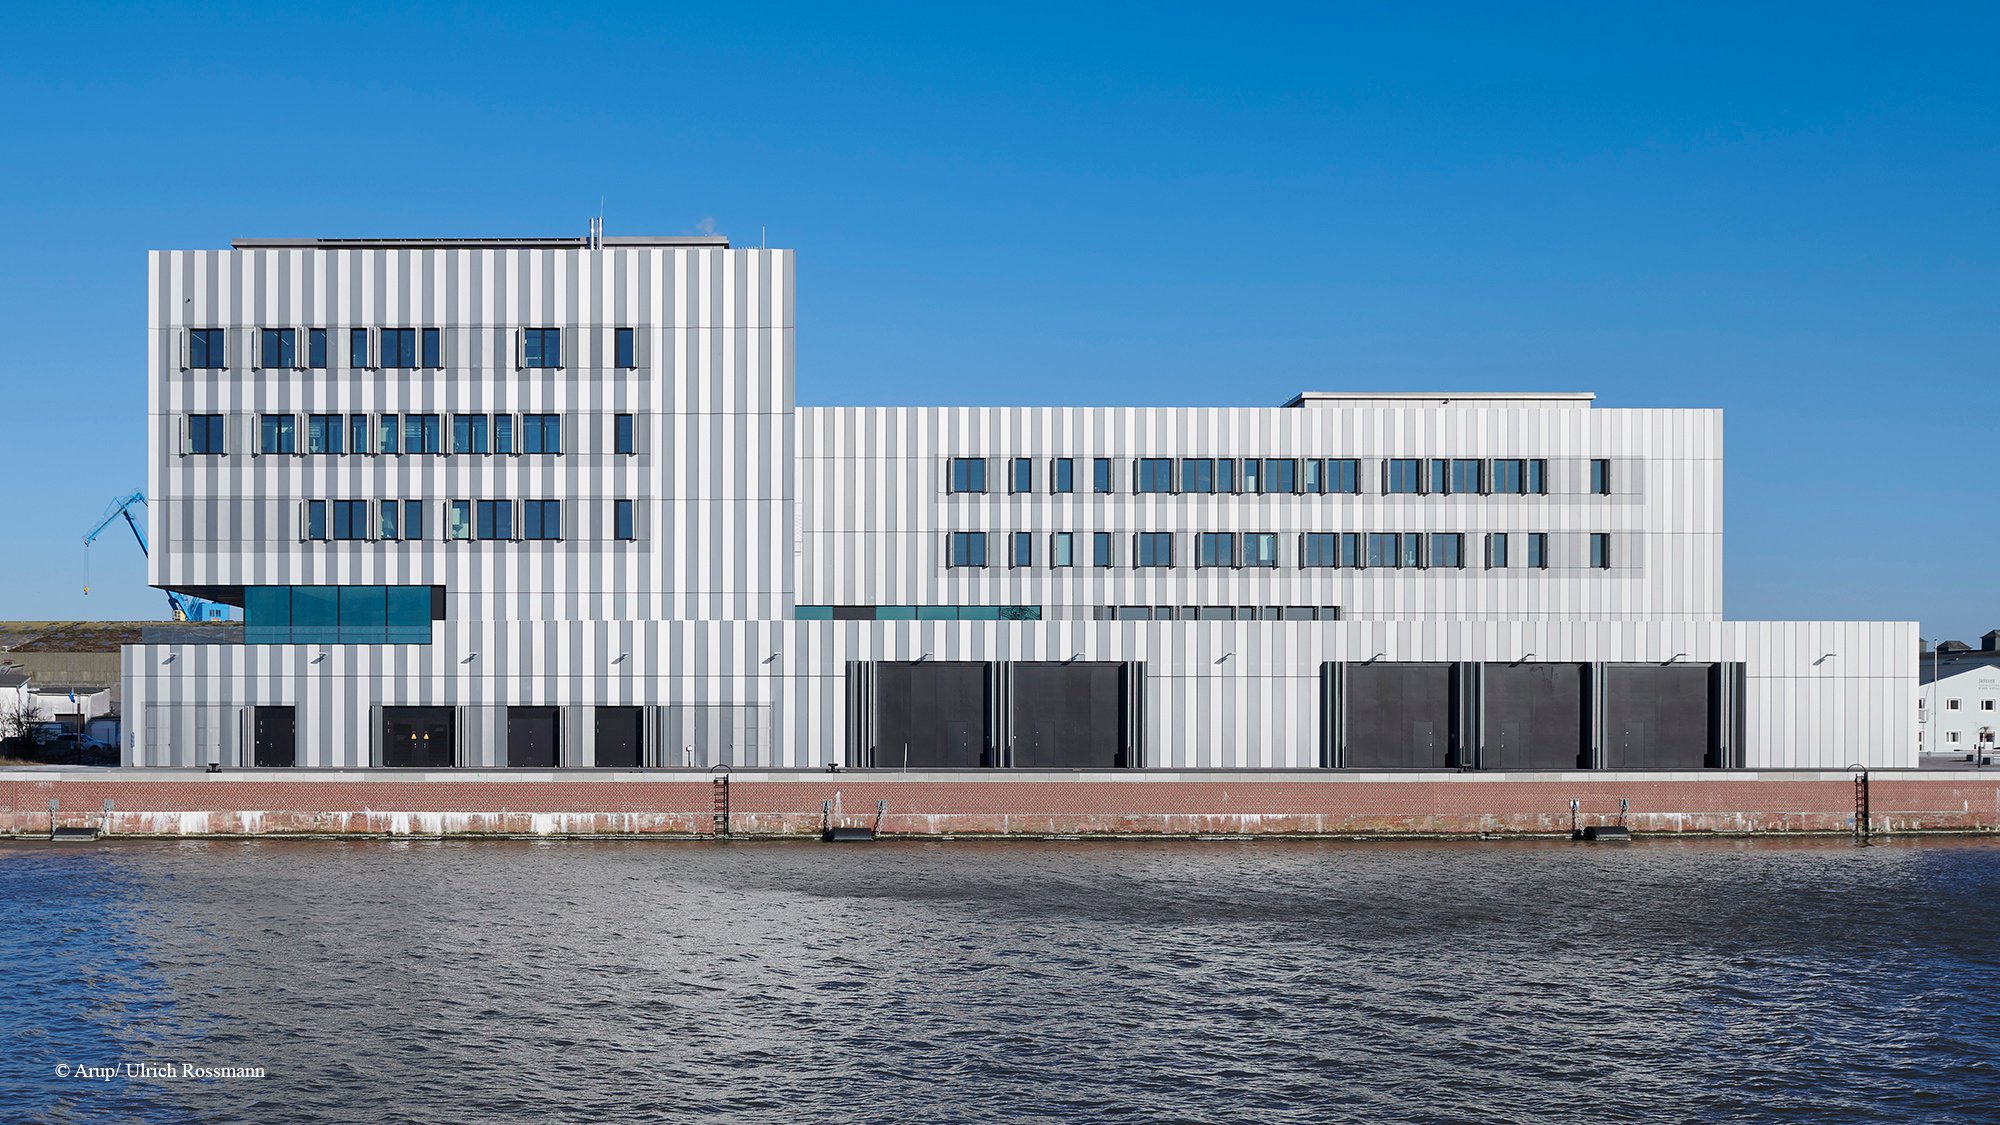 The cubic forms of the Thünen-Institut are reminiscent of irregularly stacked containers.